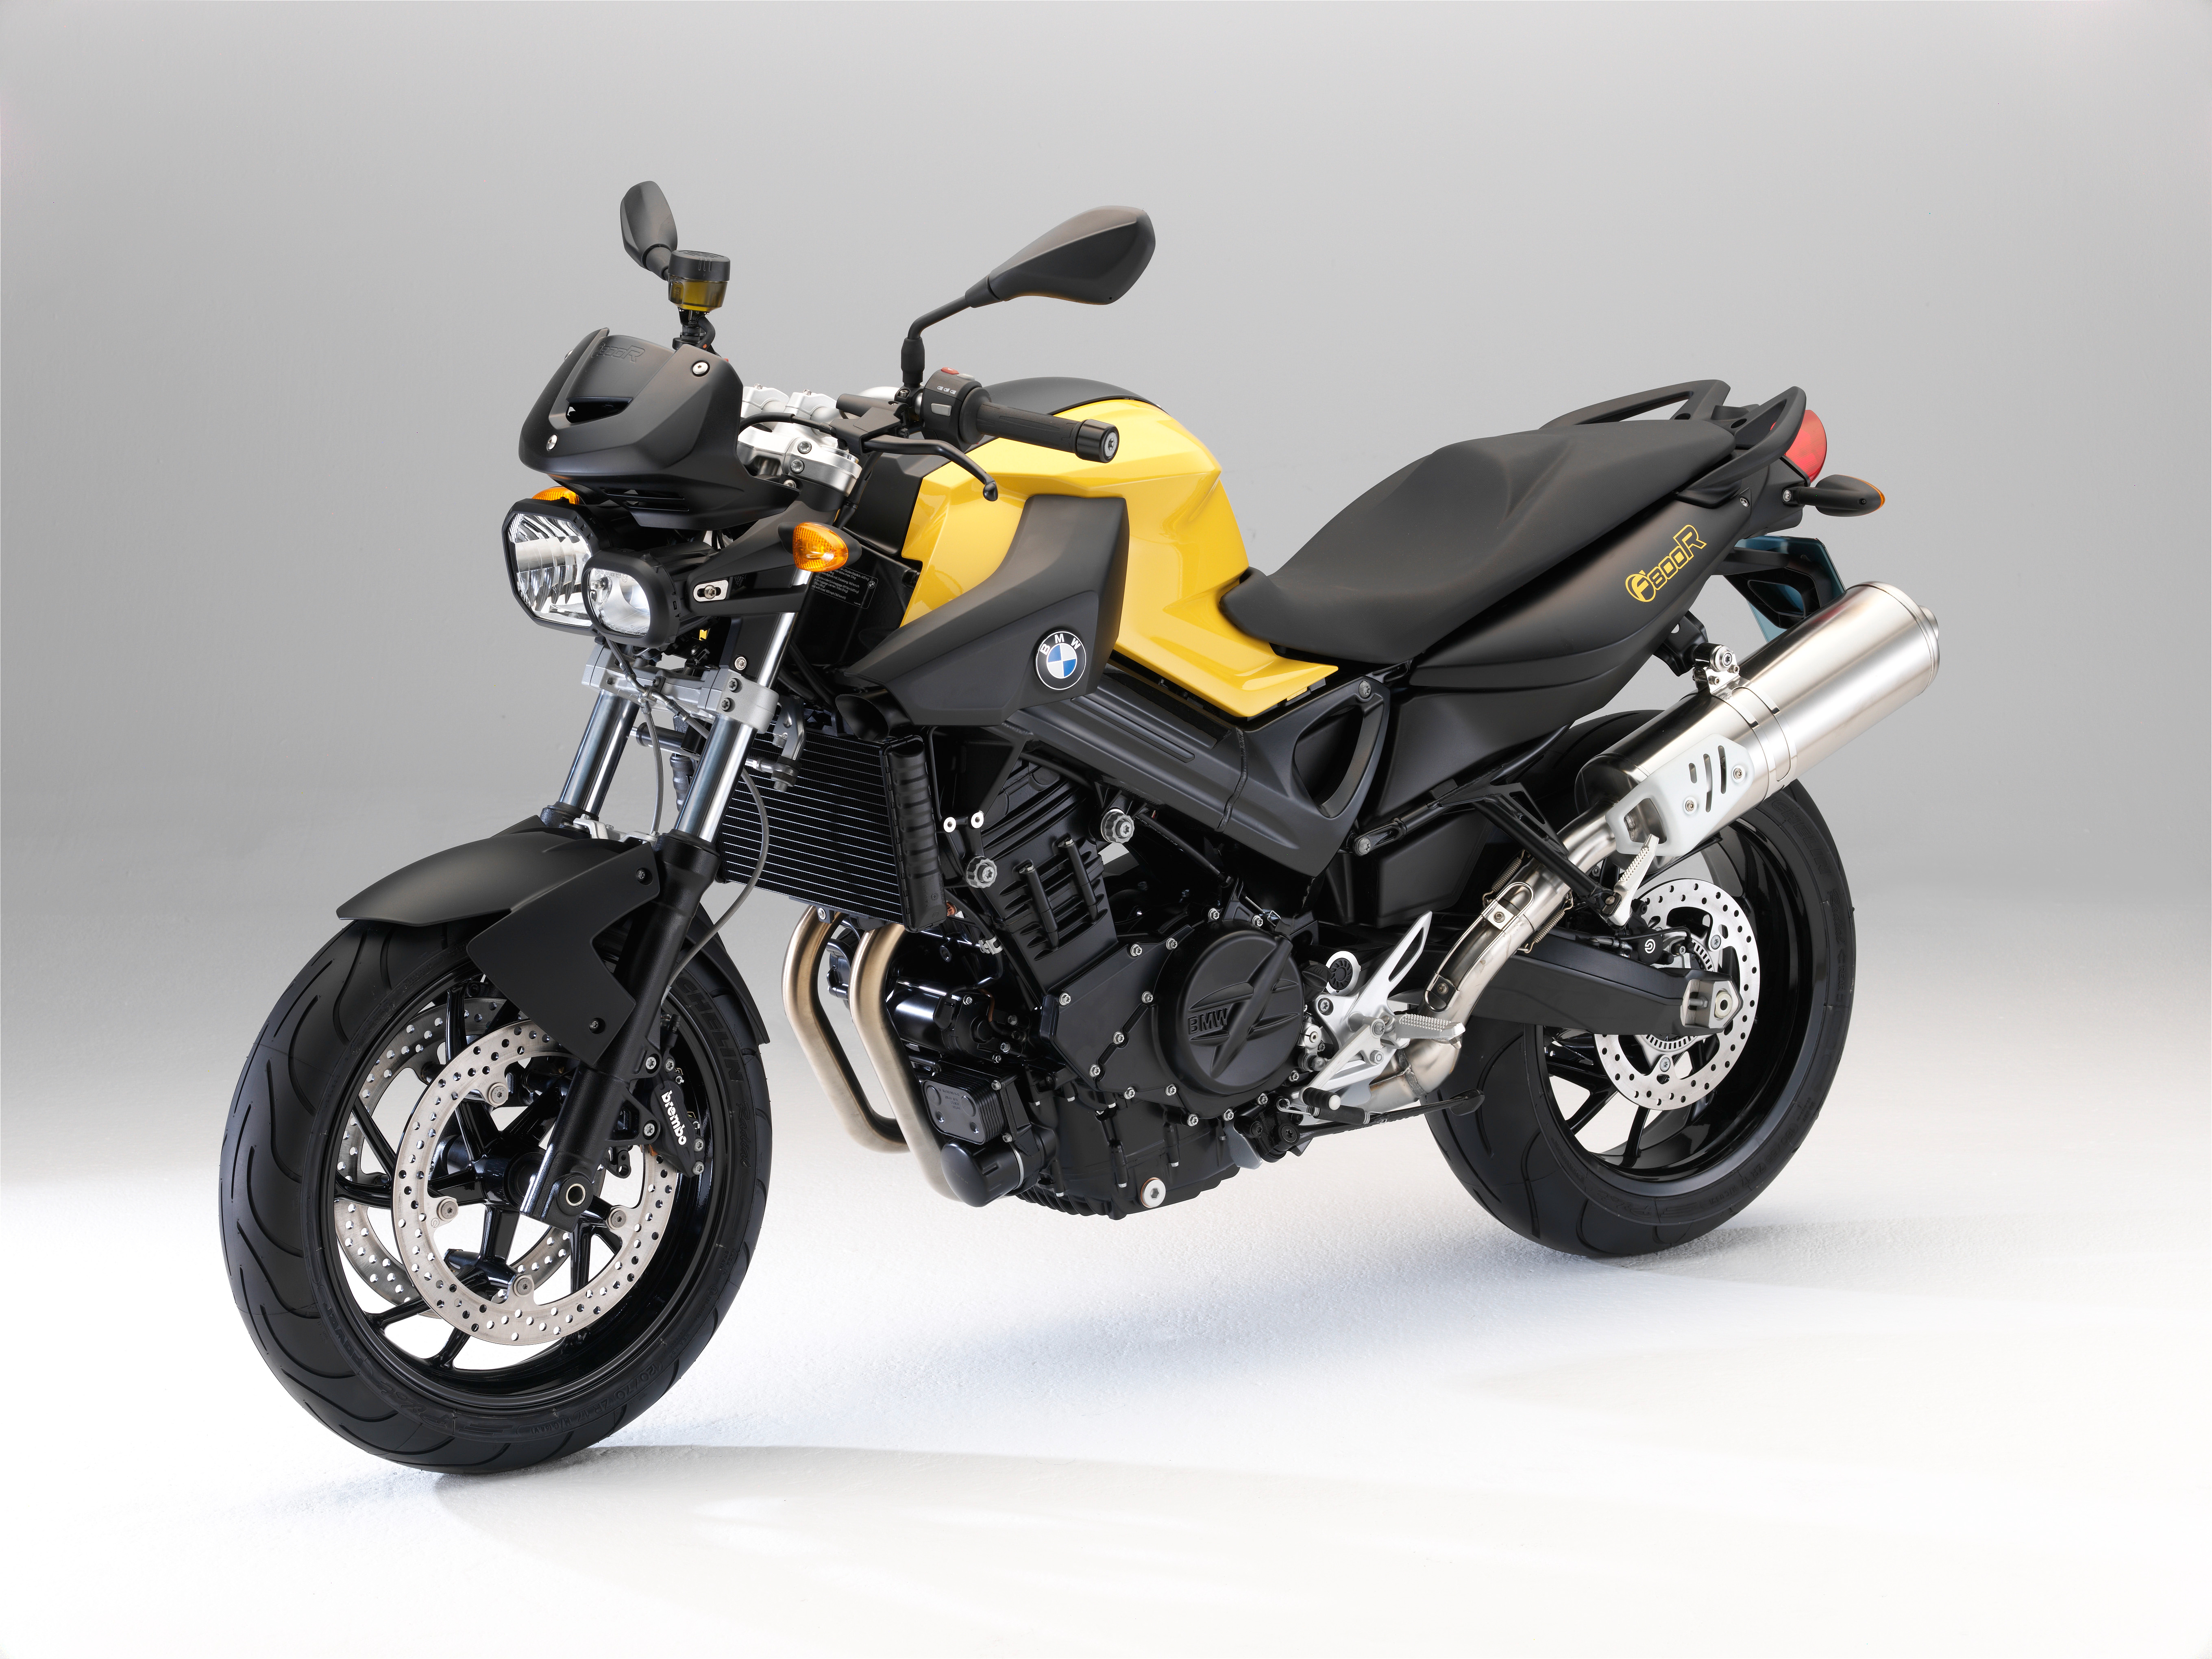 Wallpapers motorcycles BMW motorcycle yellow on the desktop